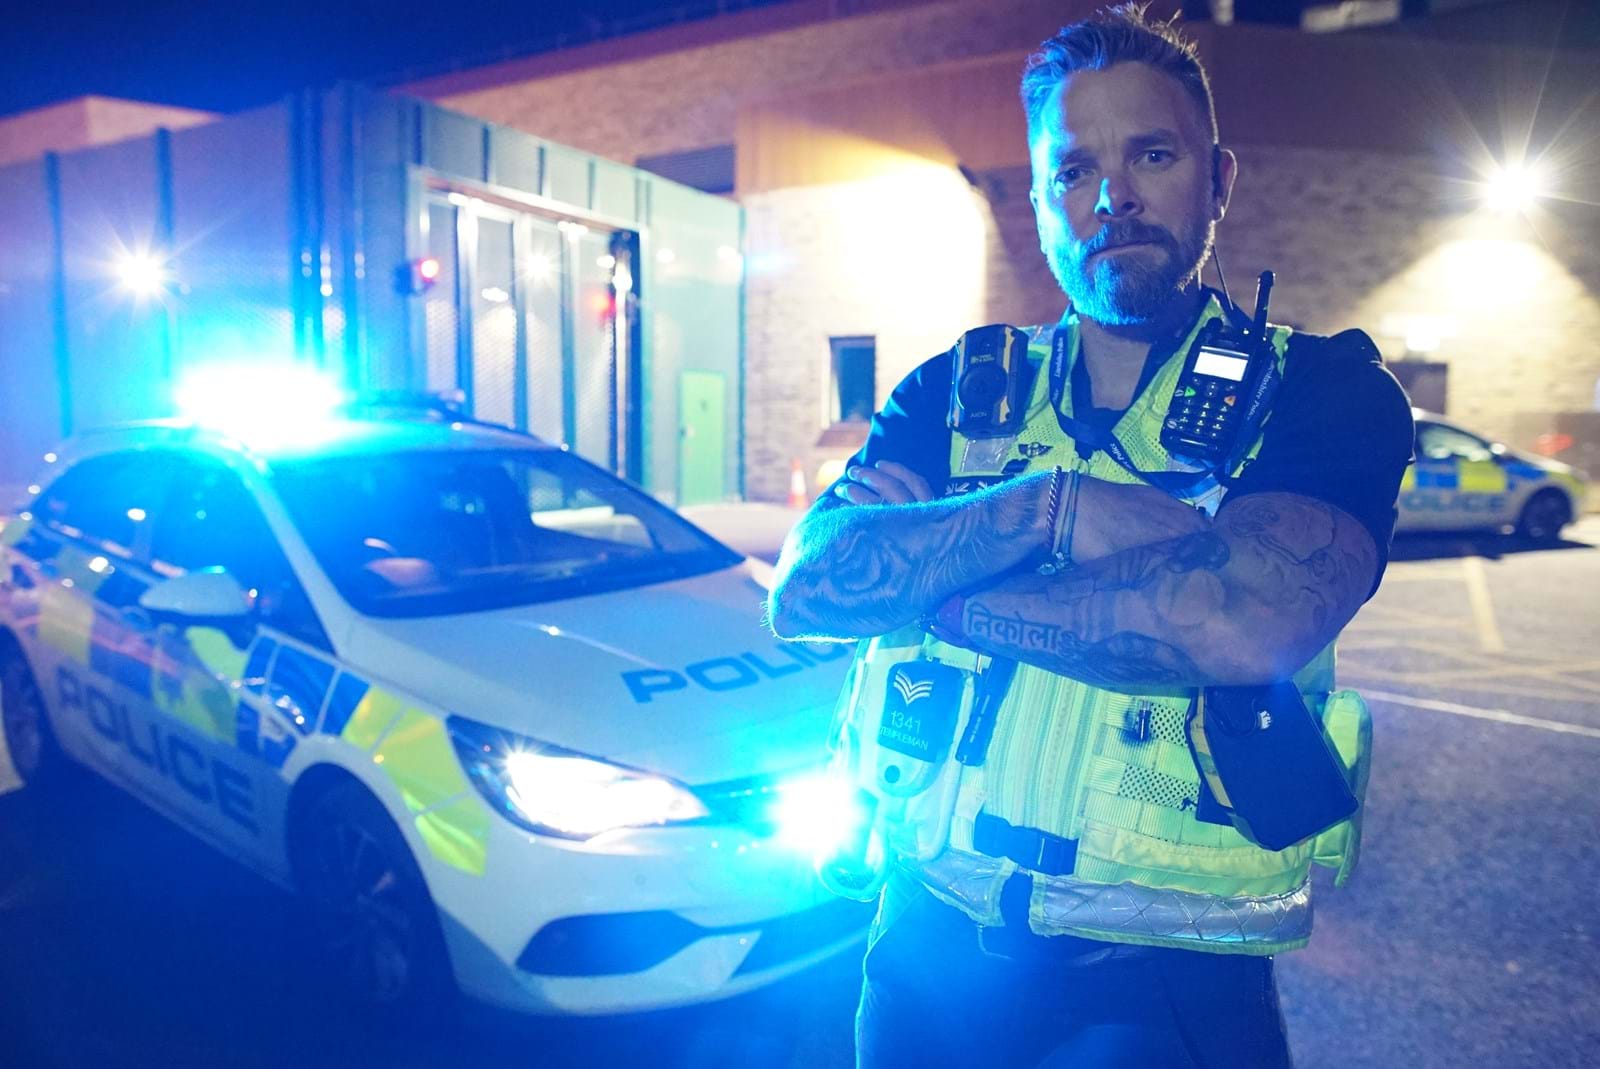 Mentorn Media returns to the beat with The Lincolnshire Police Force